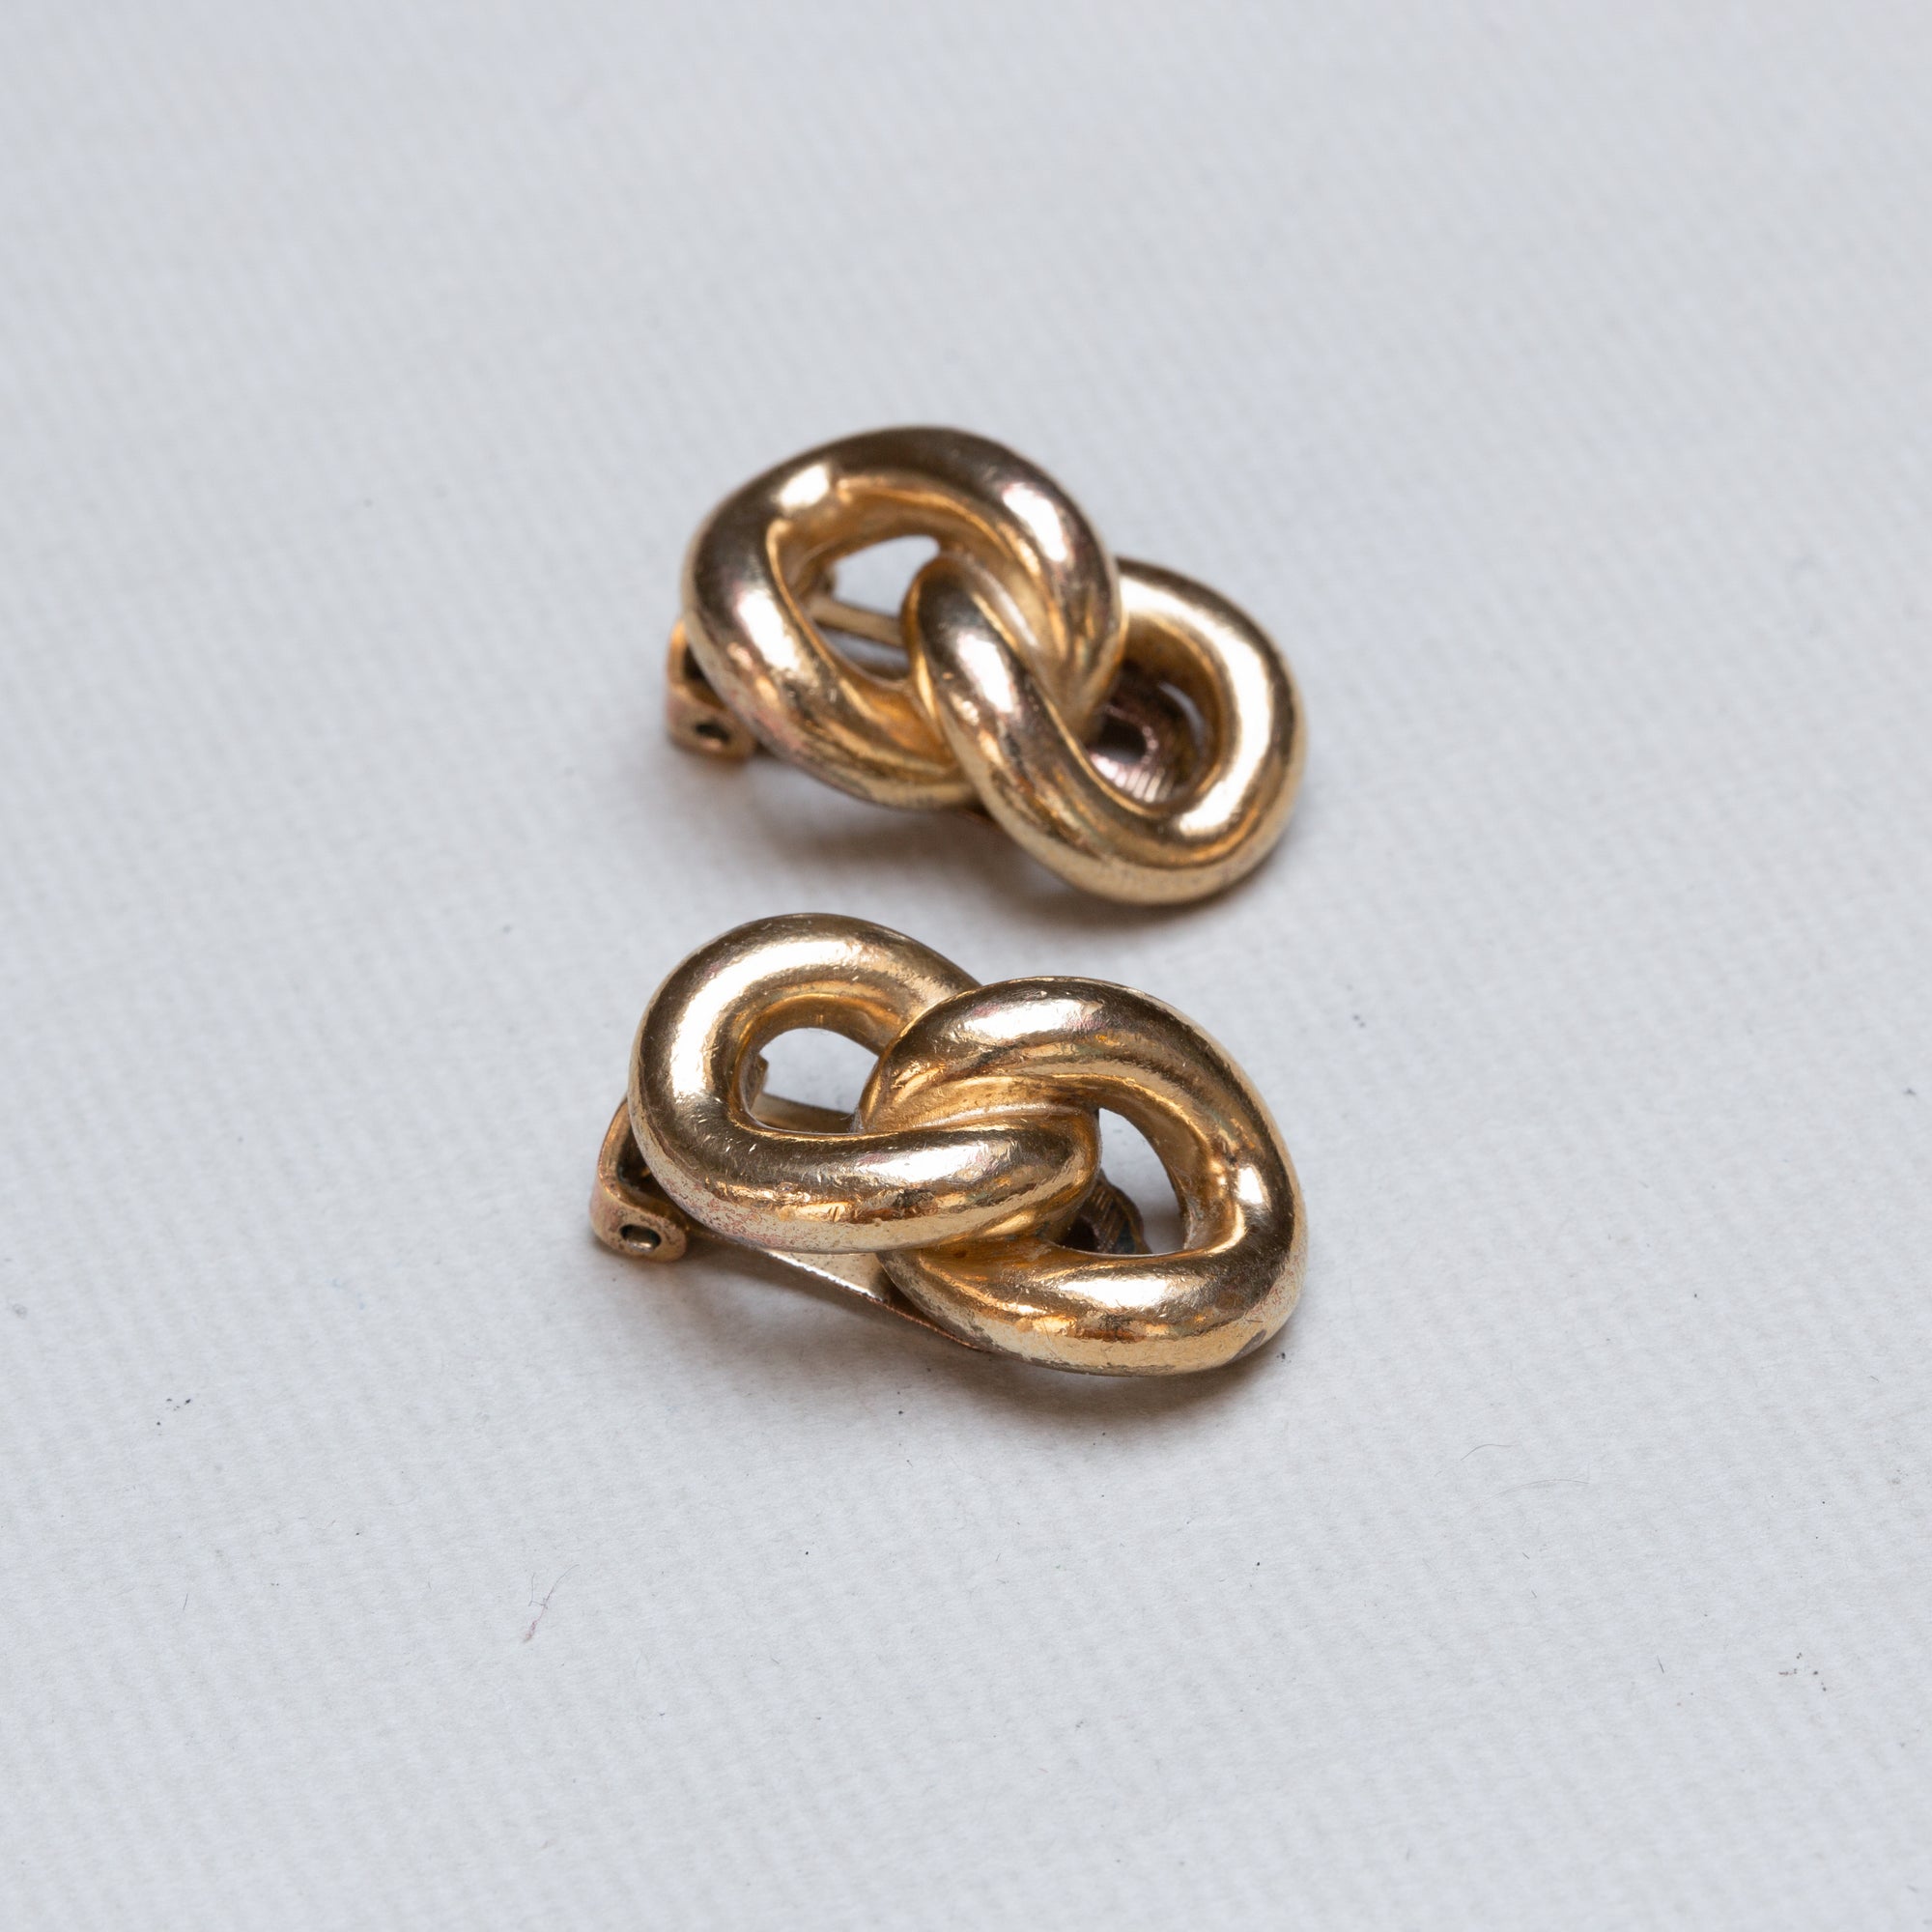 Vintage Gold Clip-on Earrings